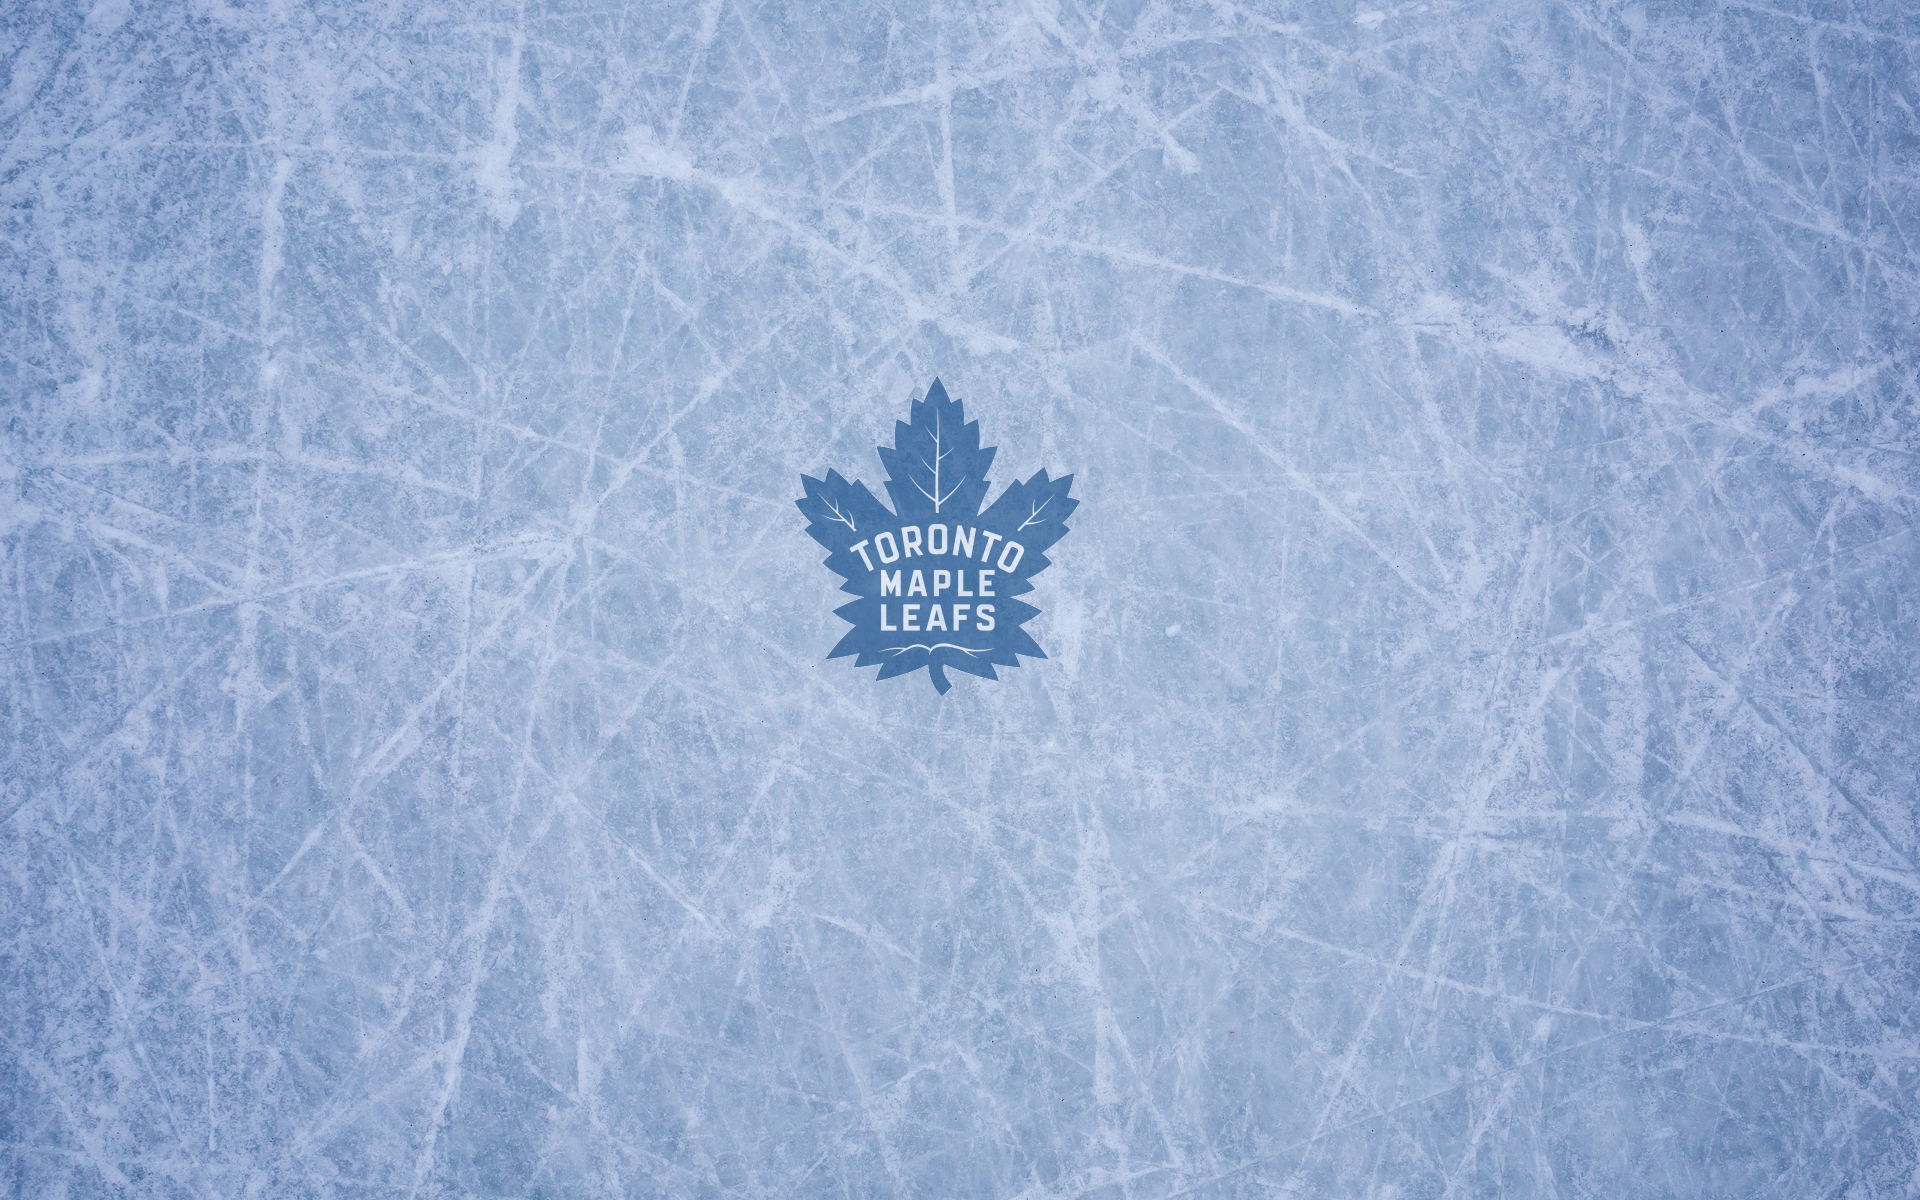 Top 999+ Toronto Maple Leafs Wallpaper Full HD, 4K✓Free to Use